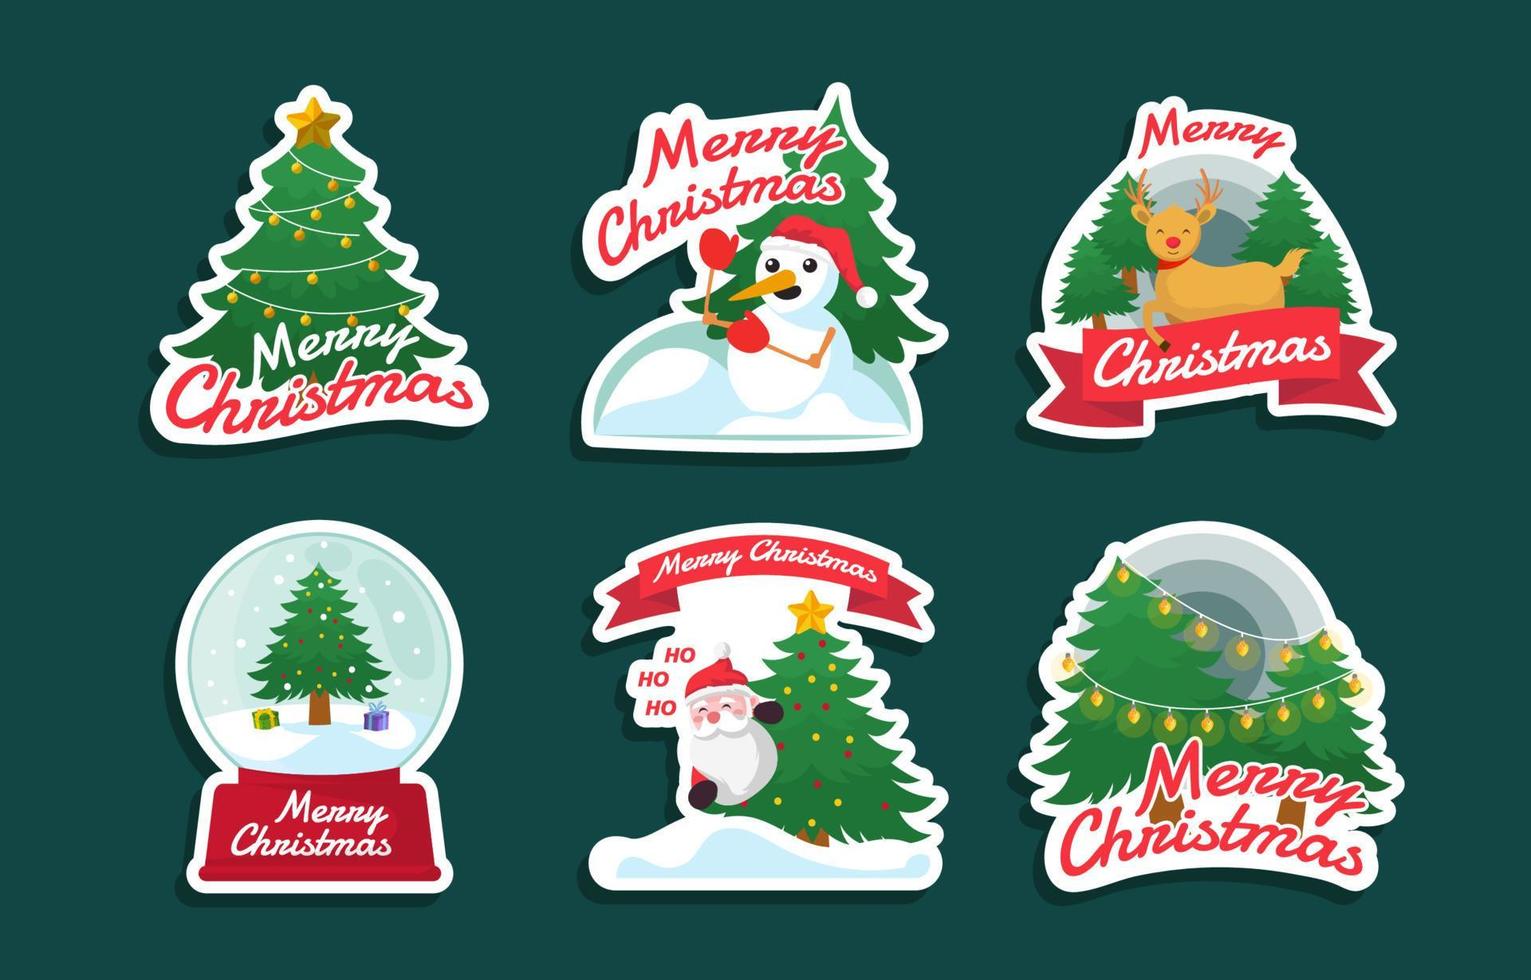 Christmas Tree Sticker Collection vector